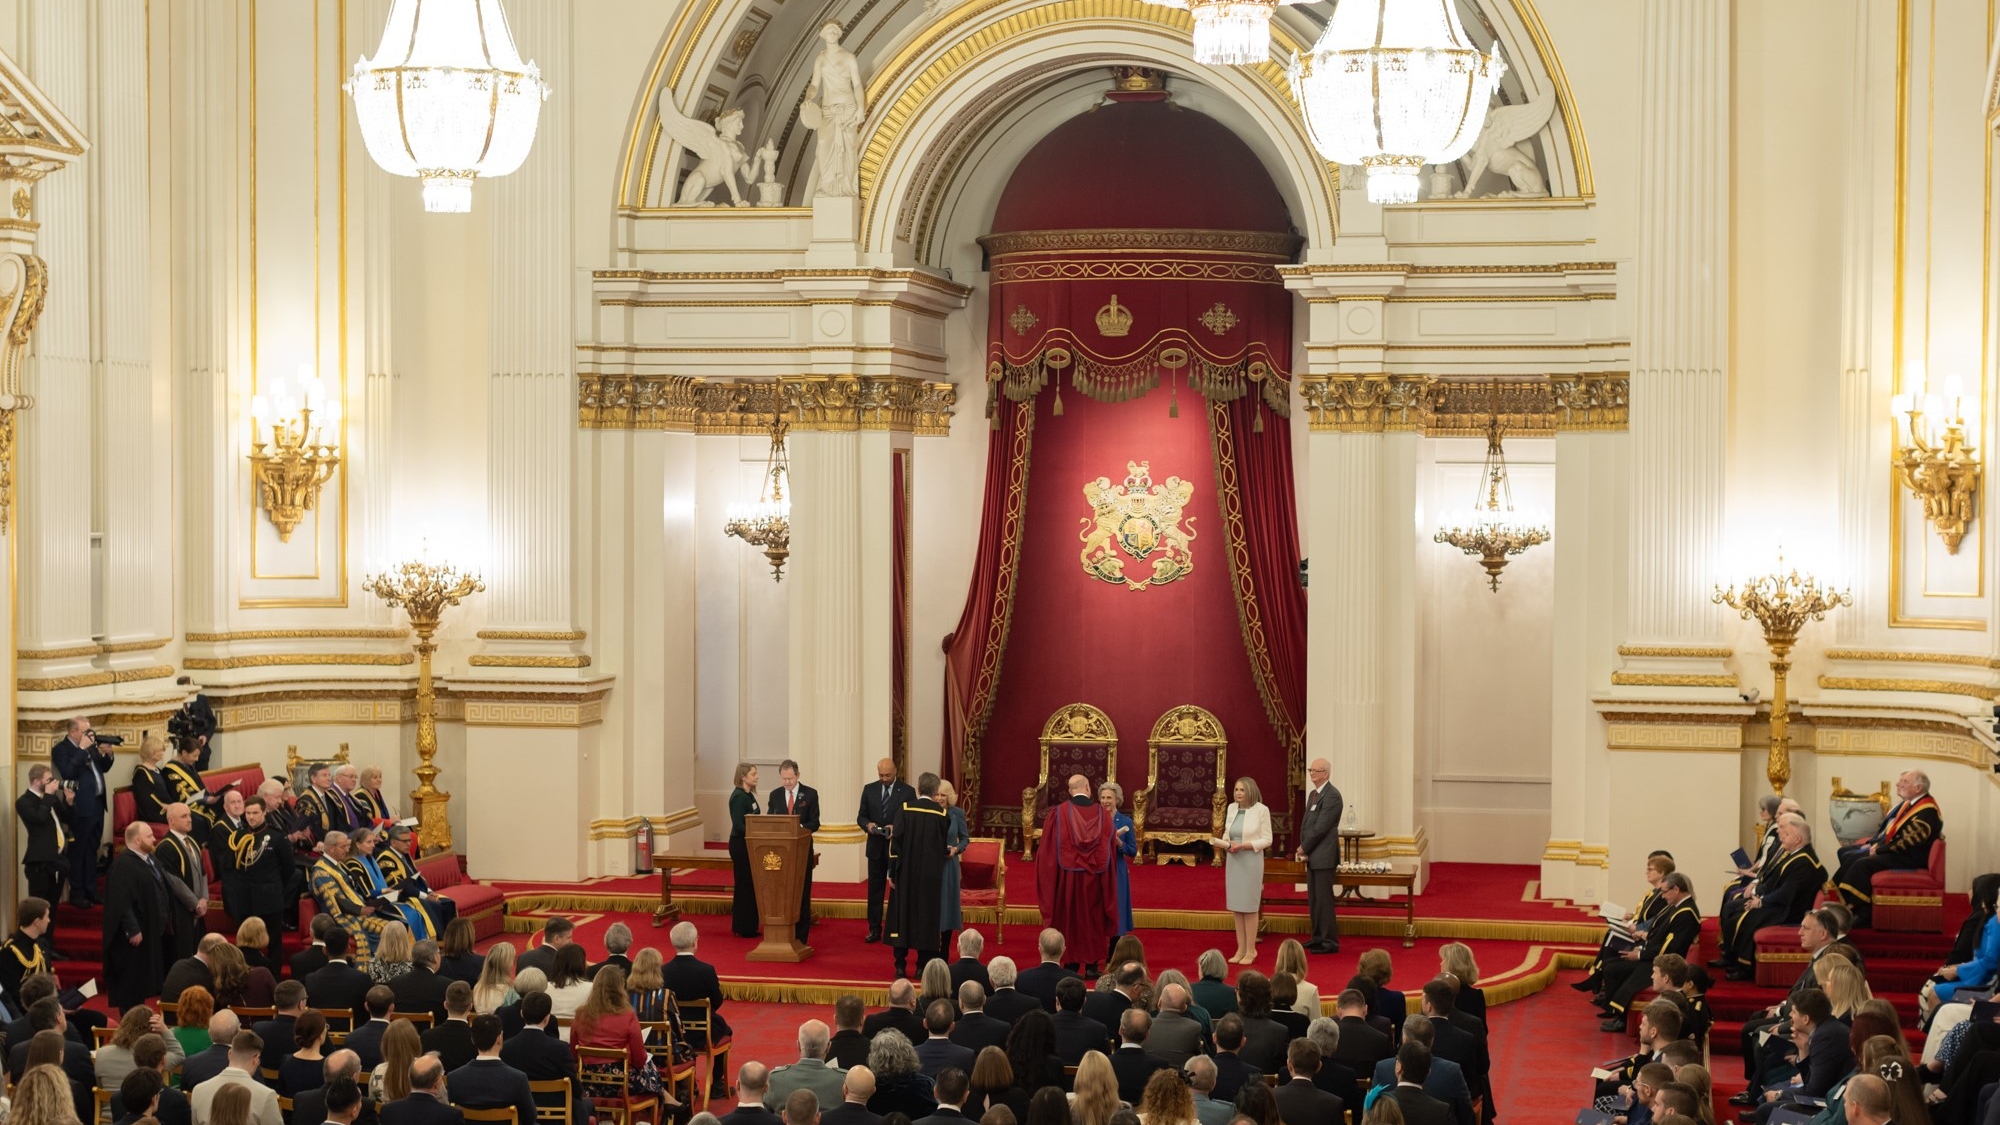 The Queen's Anniversary Prize ceremony inside the Palace